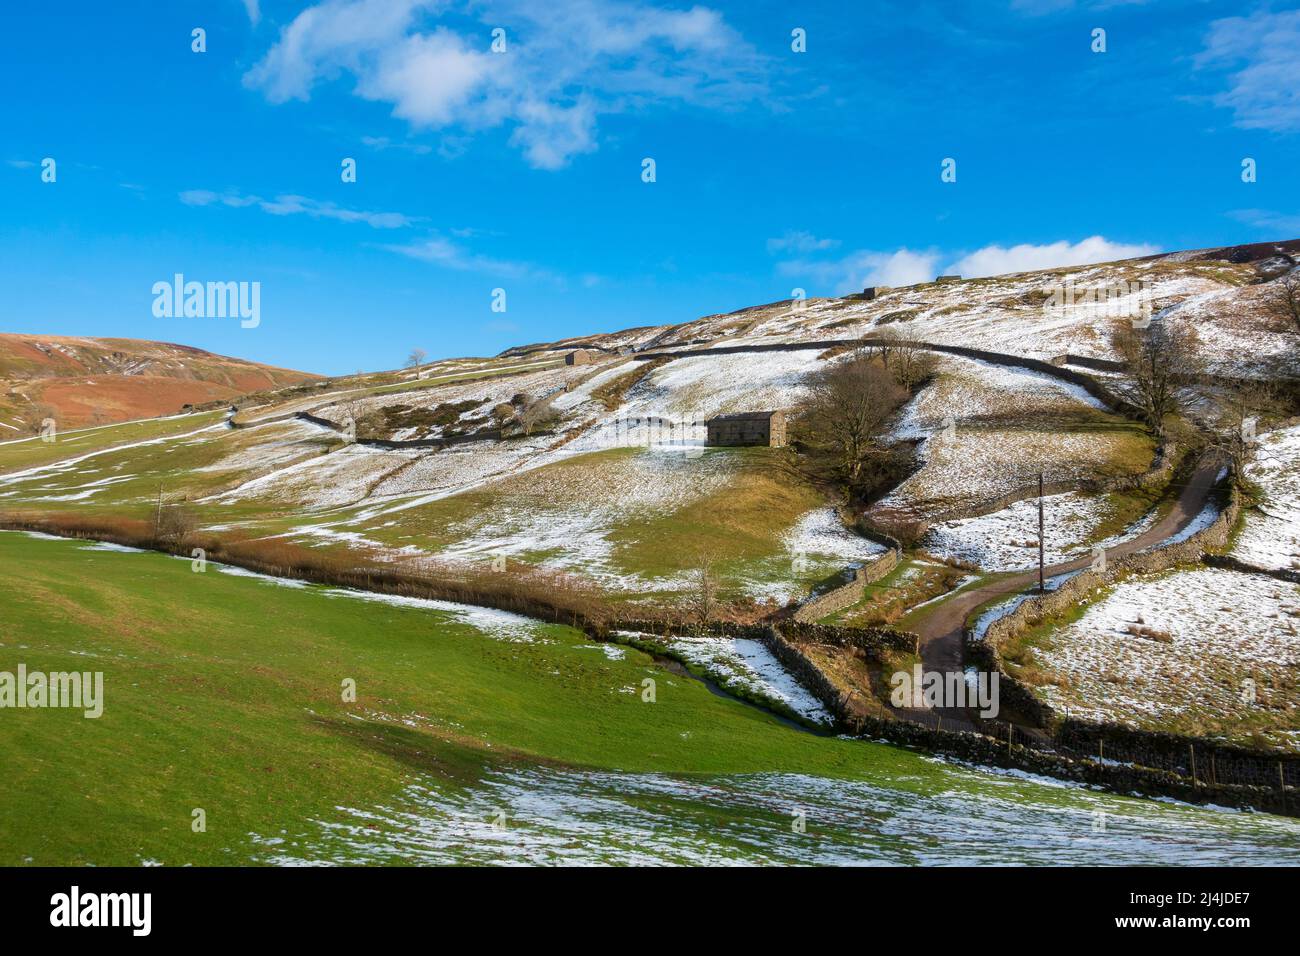 Stone barn and snow covered hills in Swaledale, Yorkshire Dales National Park. Stock Photo